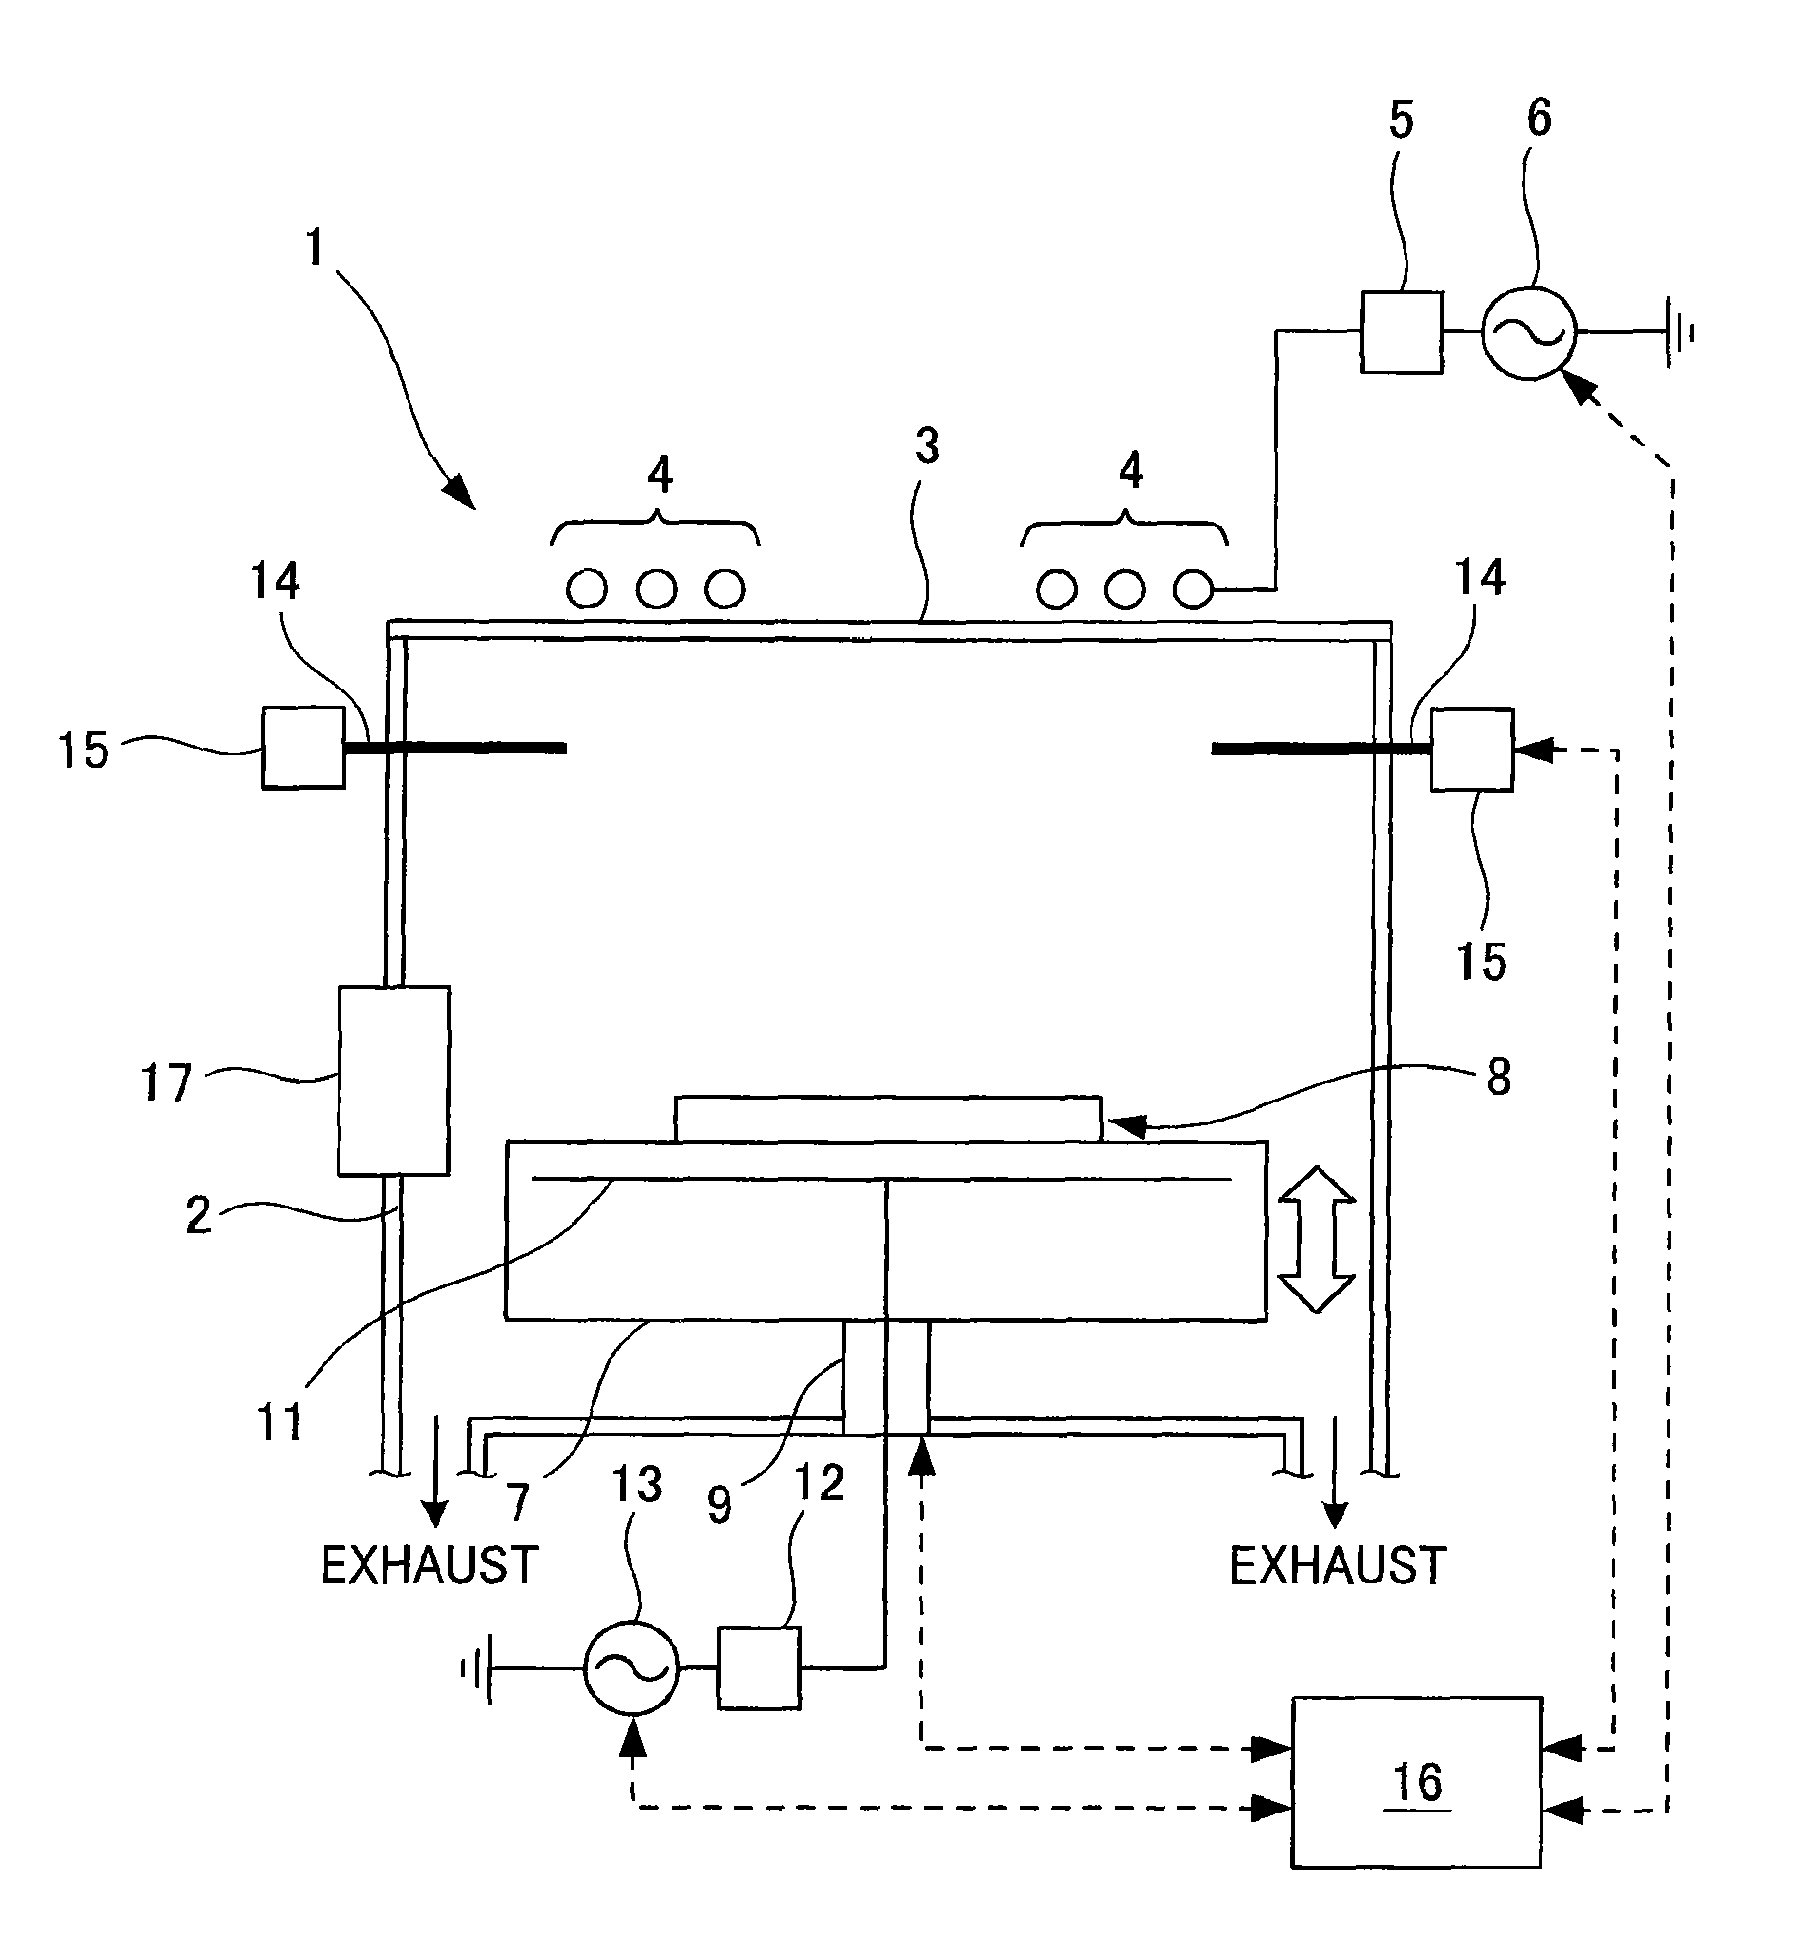 Insulating film for semiconductor device, process and apparatus for producing insulating film for semiconductor device, semiconductor device, and process for producing the semiconductor device